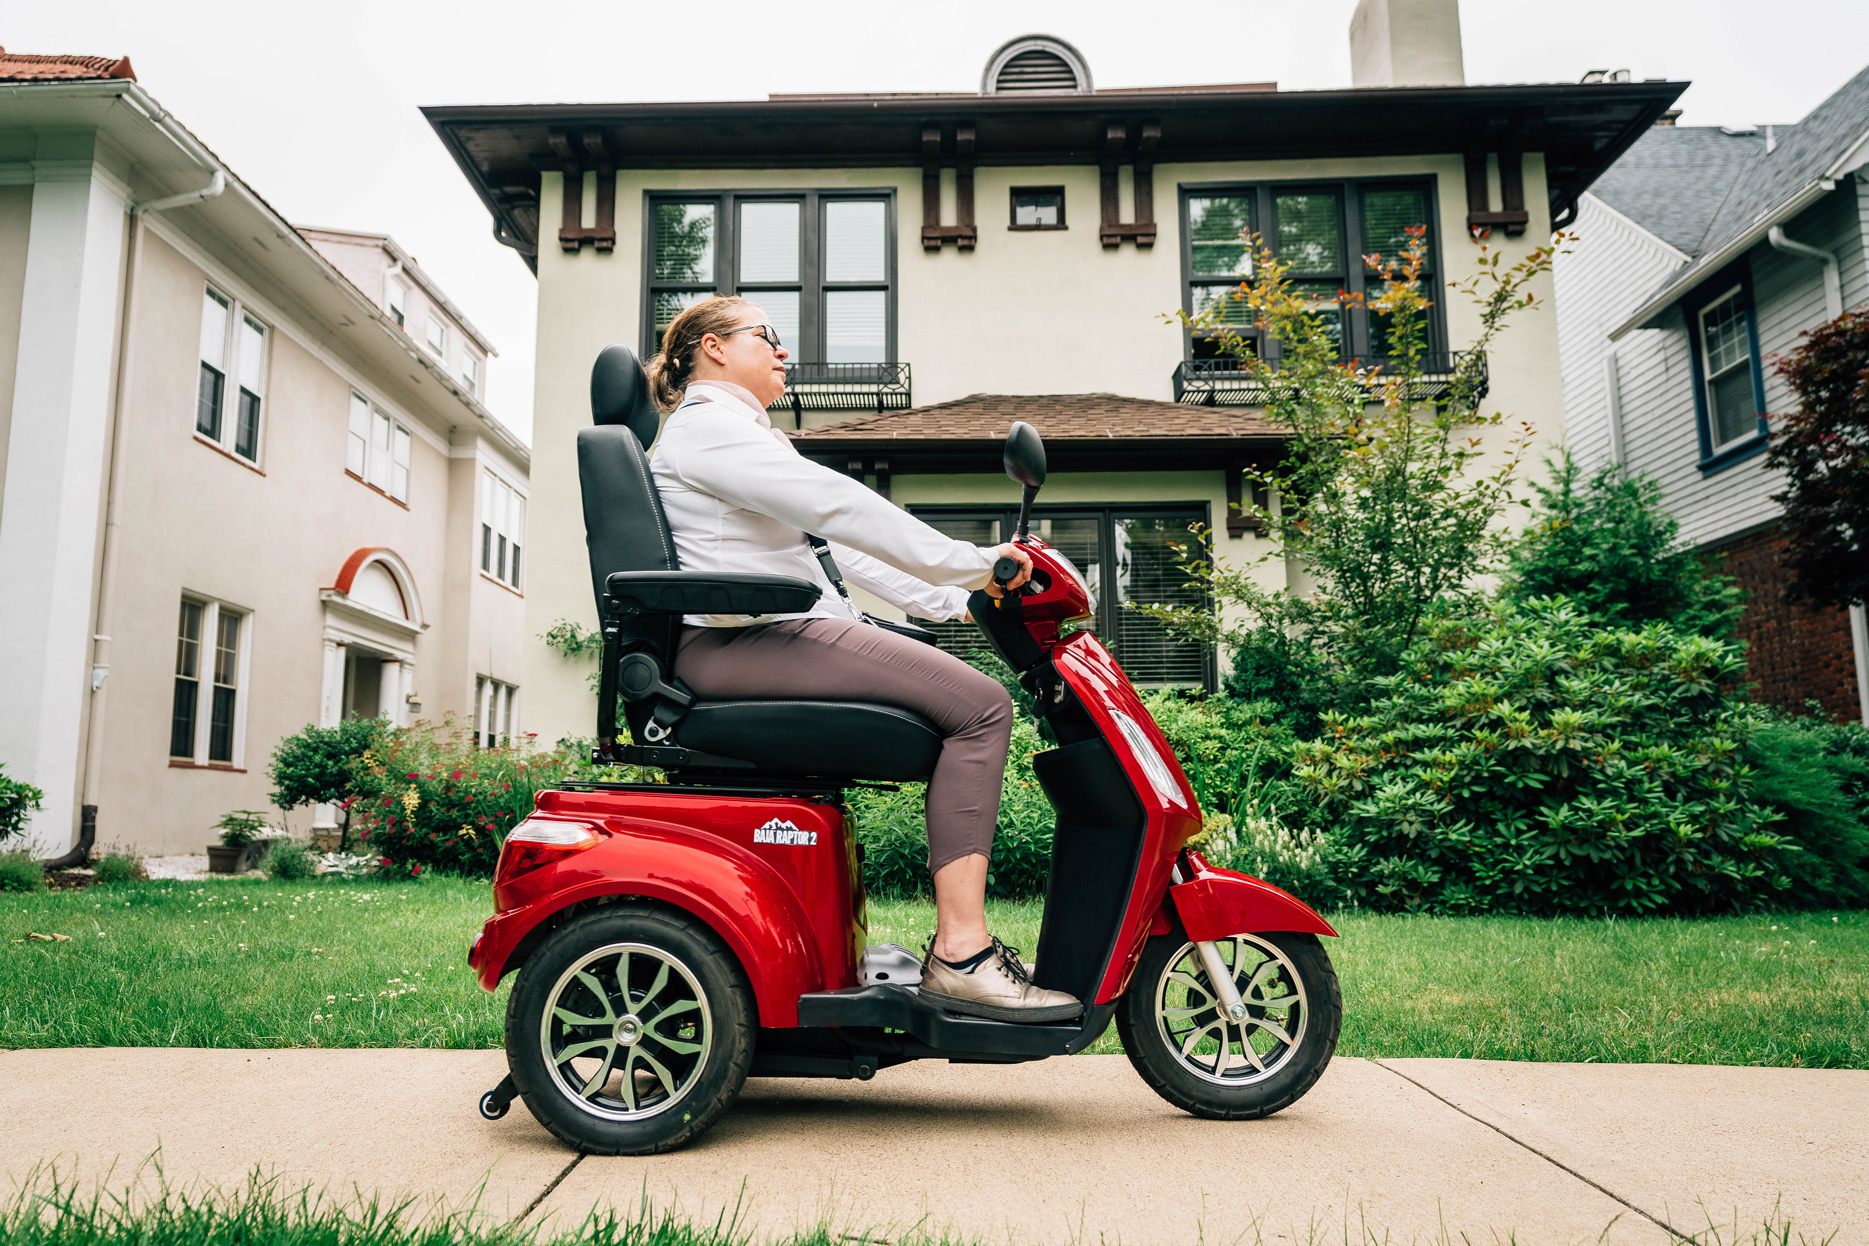 Mobility Scooter Insurance